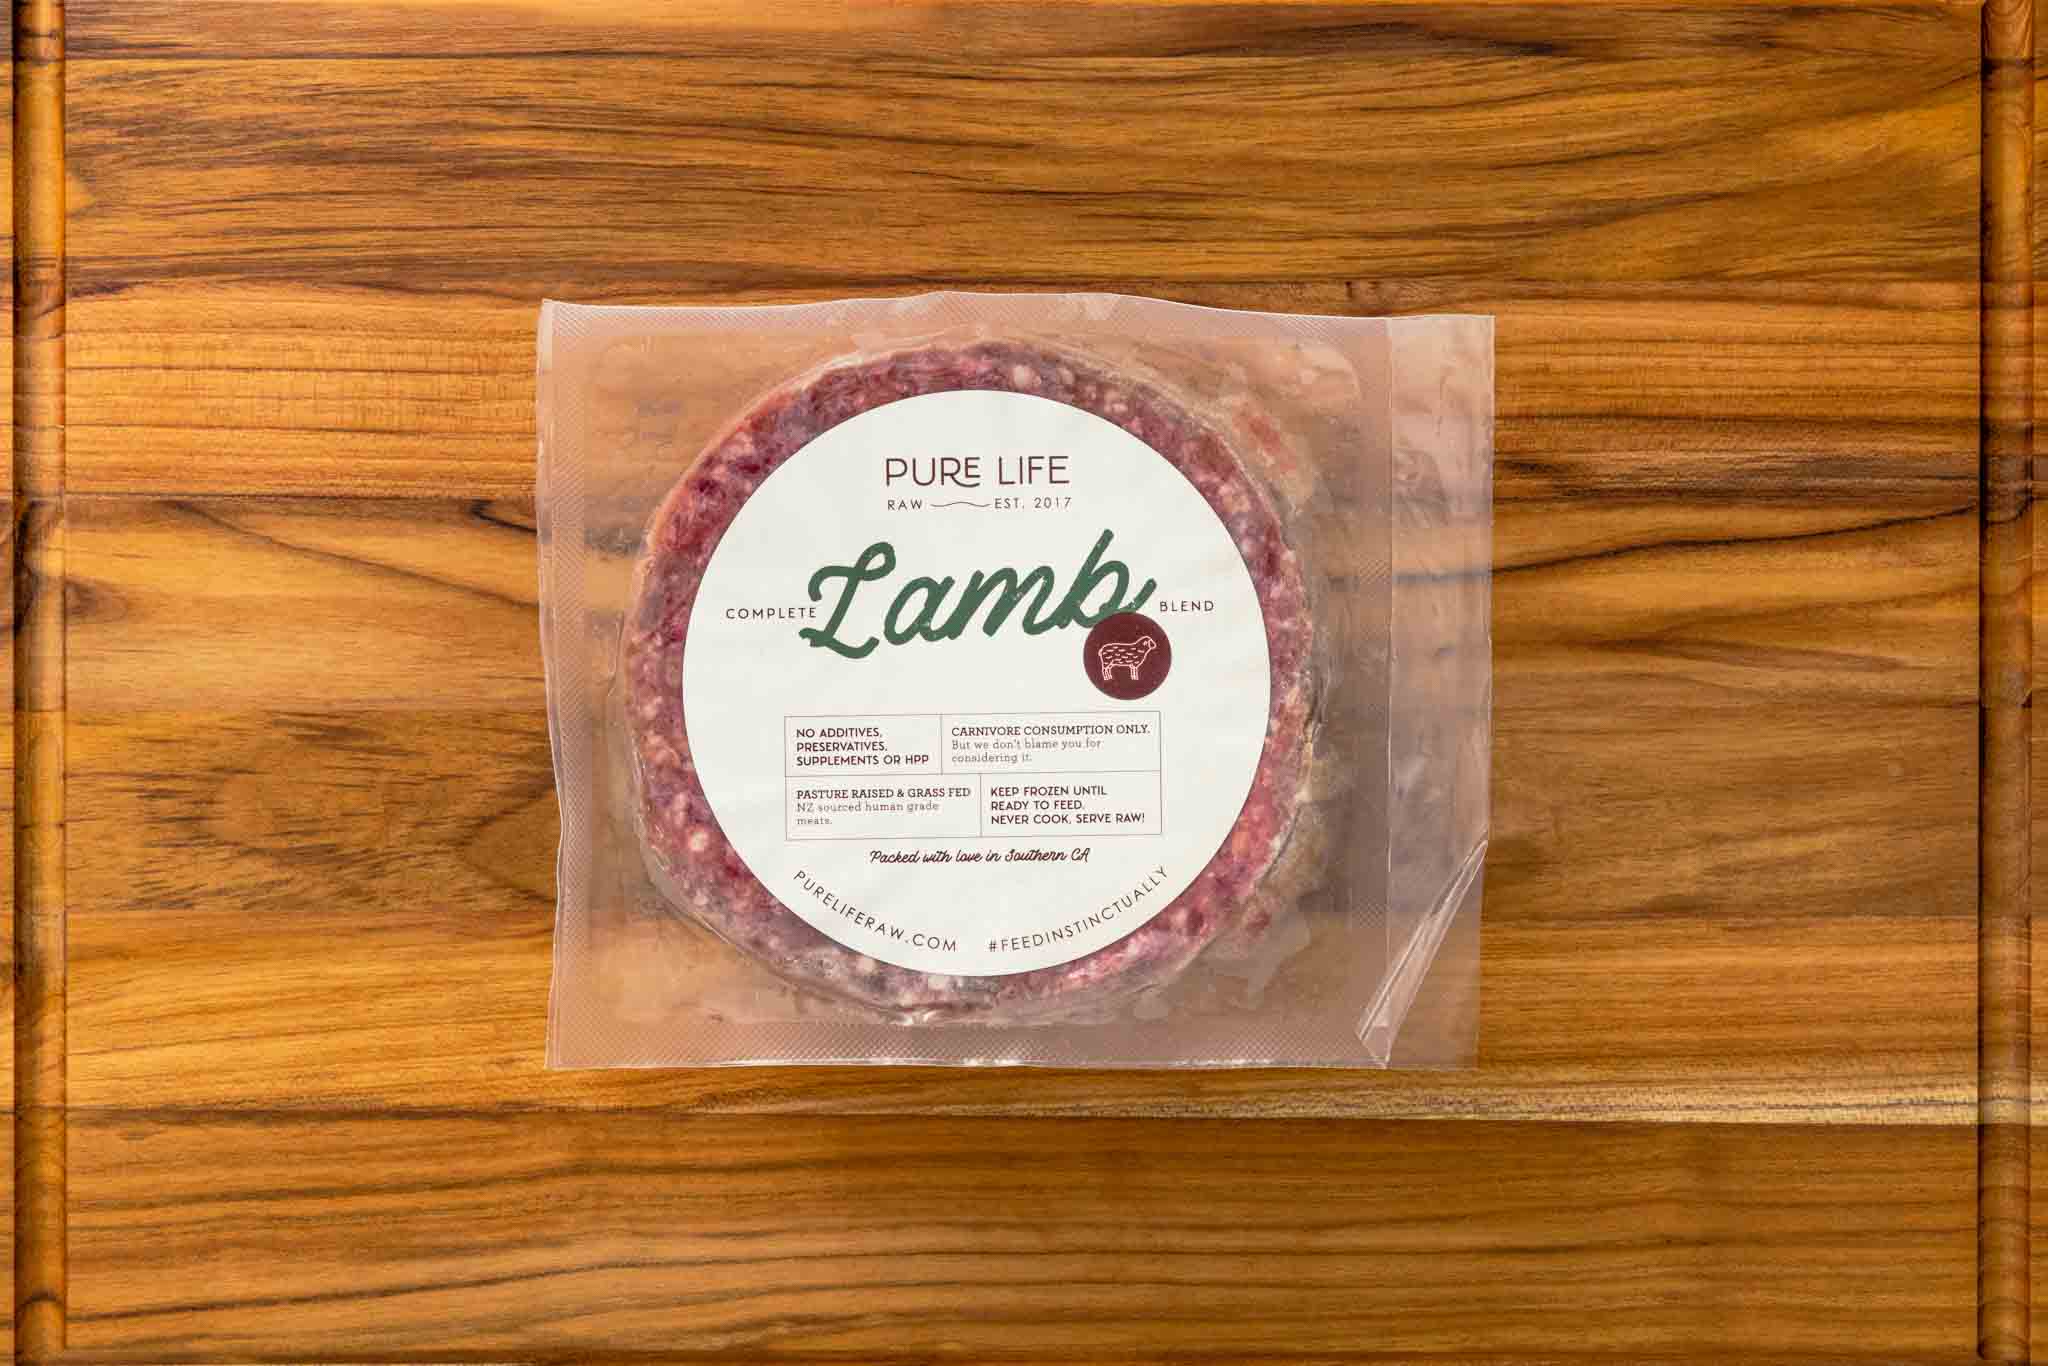 Packaged Raw Lamb Blend - Pet Food - Pure Life Raw